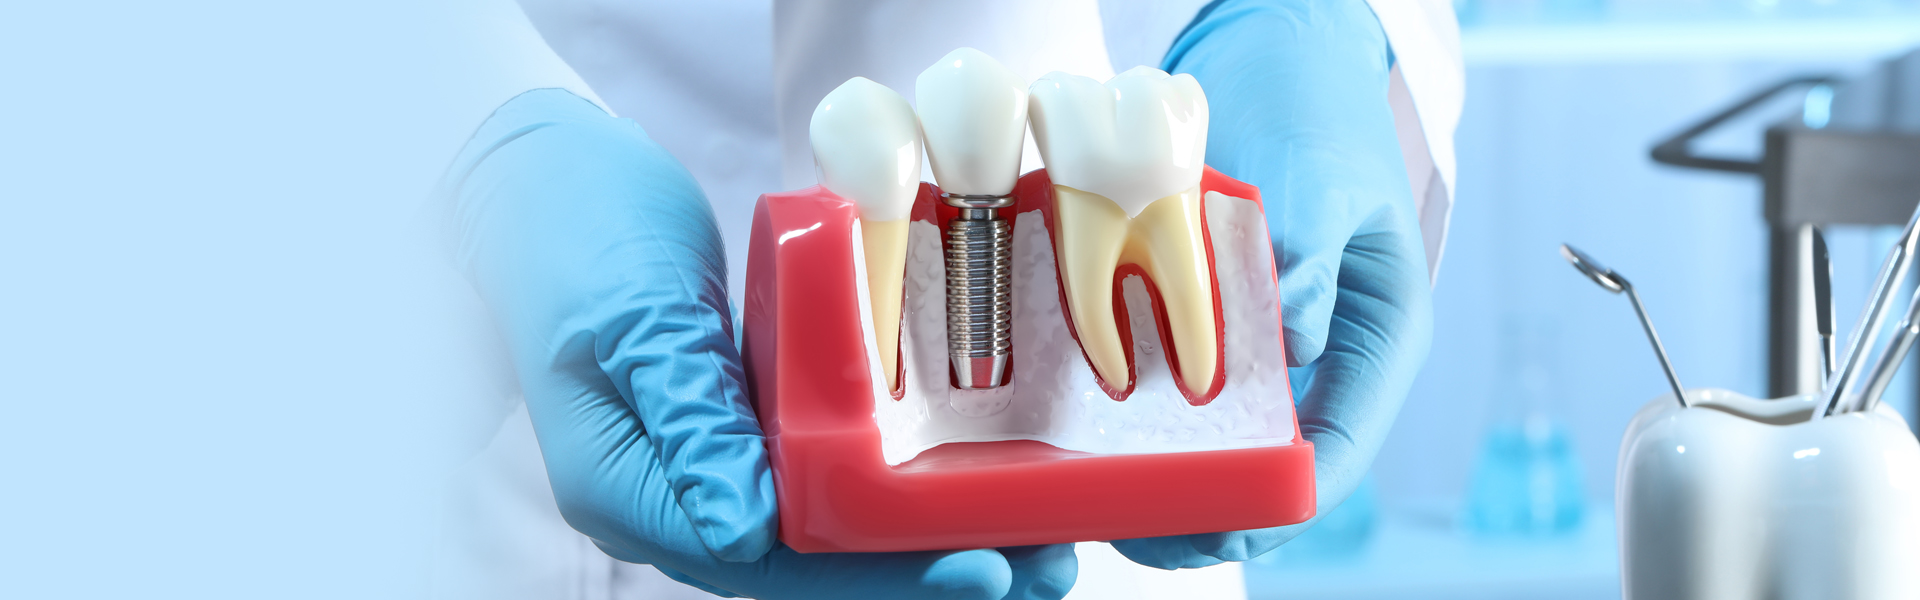 Immediate Implants Vs. Delayed Dental Implant: What's The Difference?